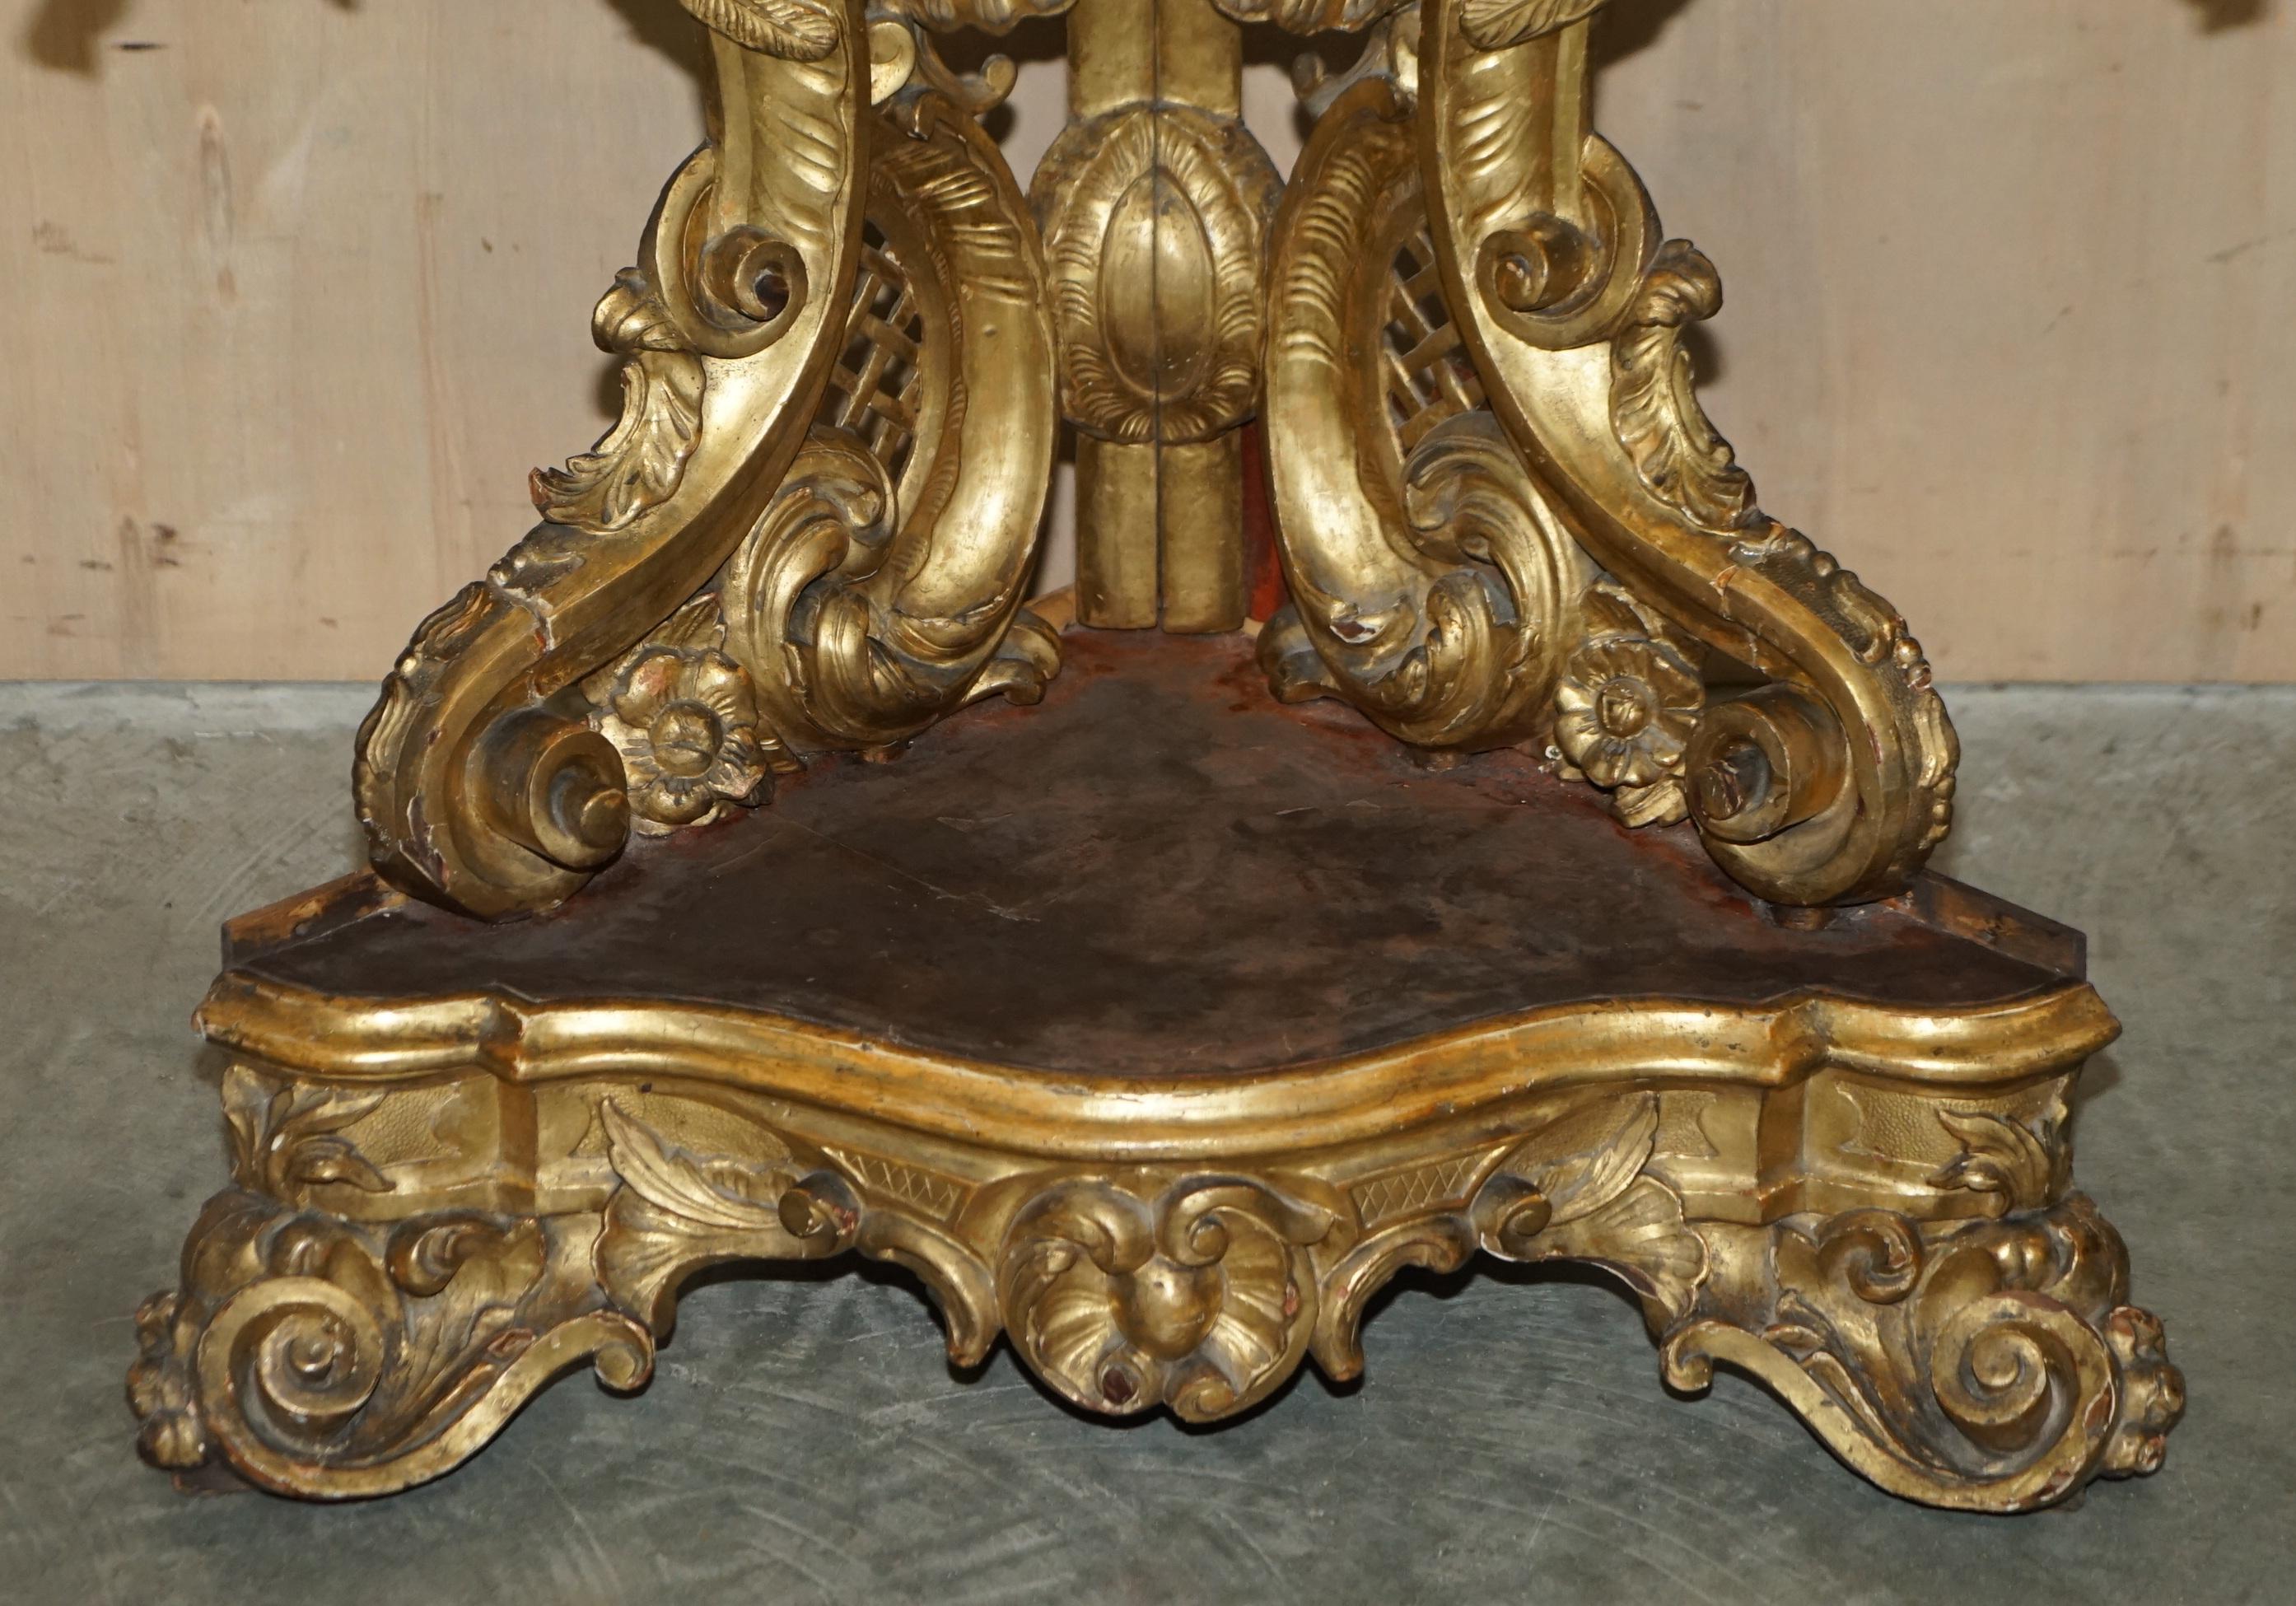 Hand-Crafted Exquisite Antique Italian Gold Giltwood Italian Marble Herm Carved Corner Table For Sale